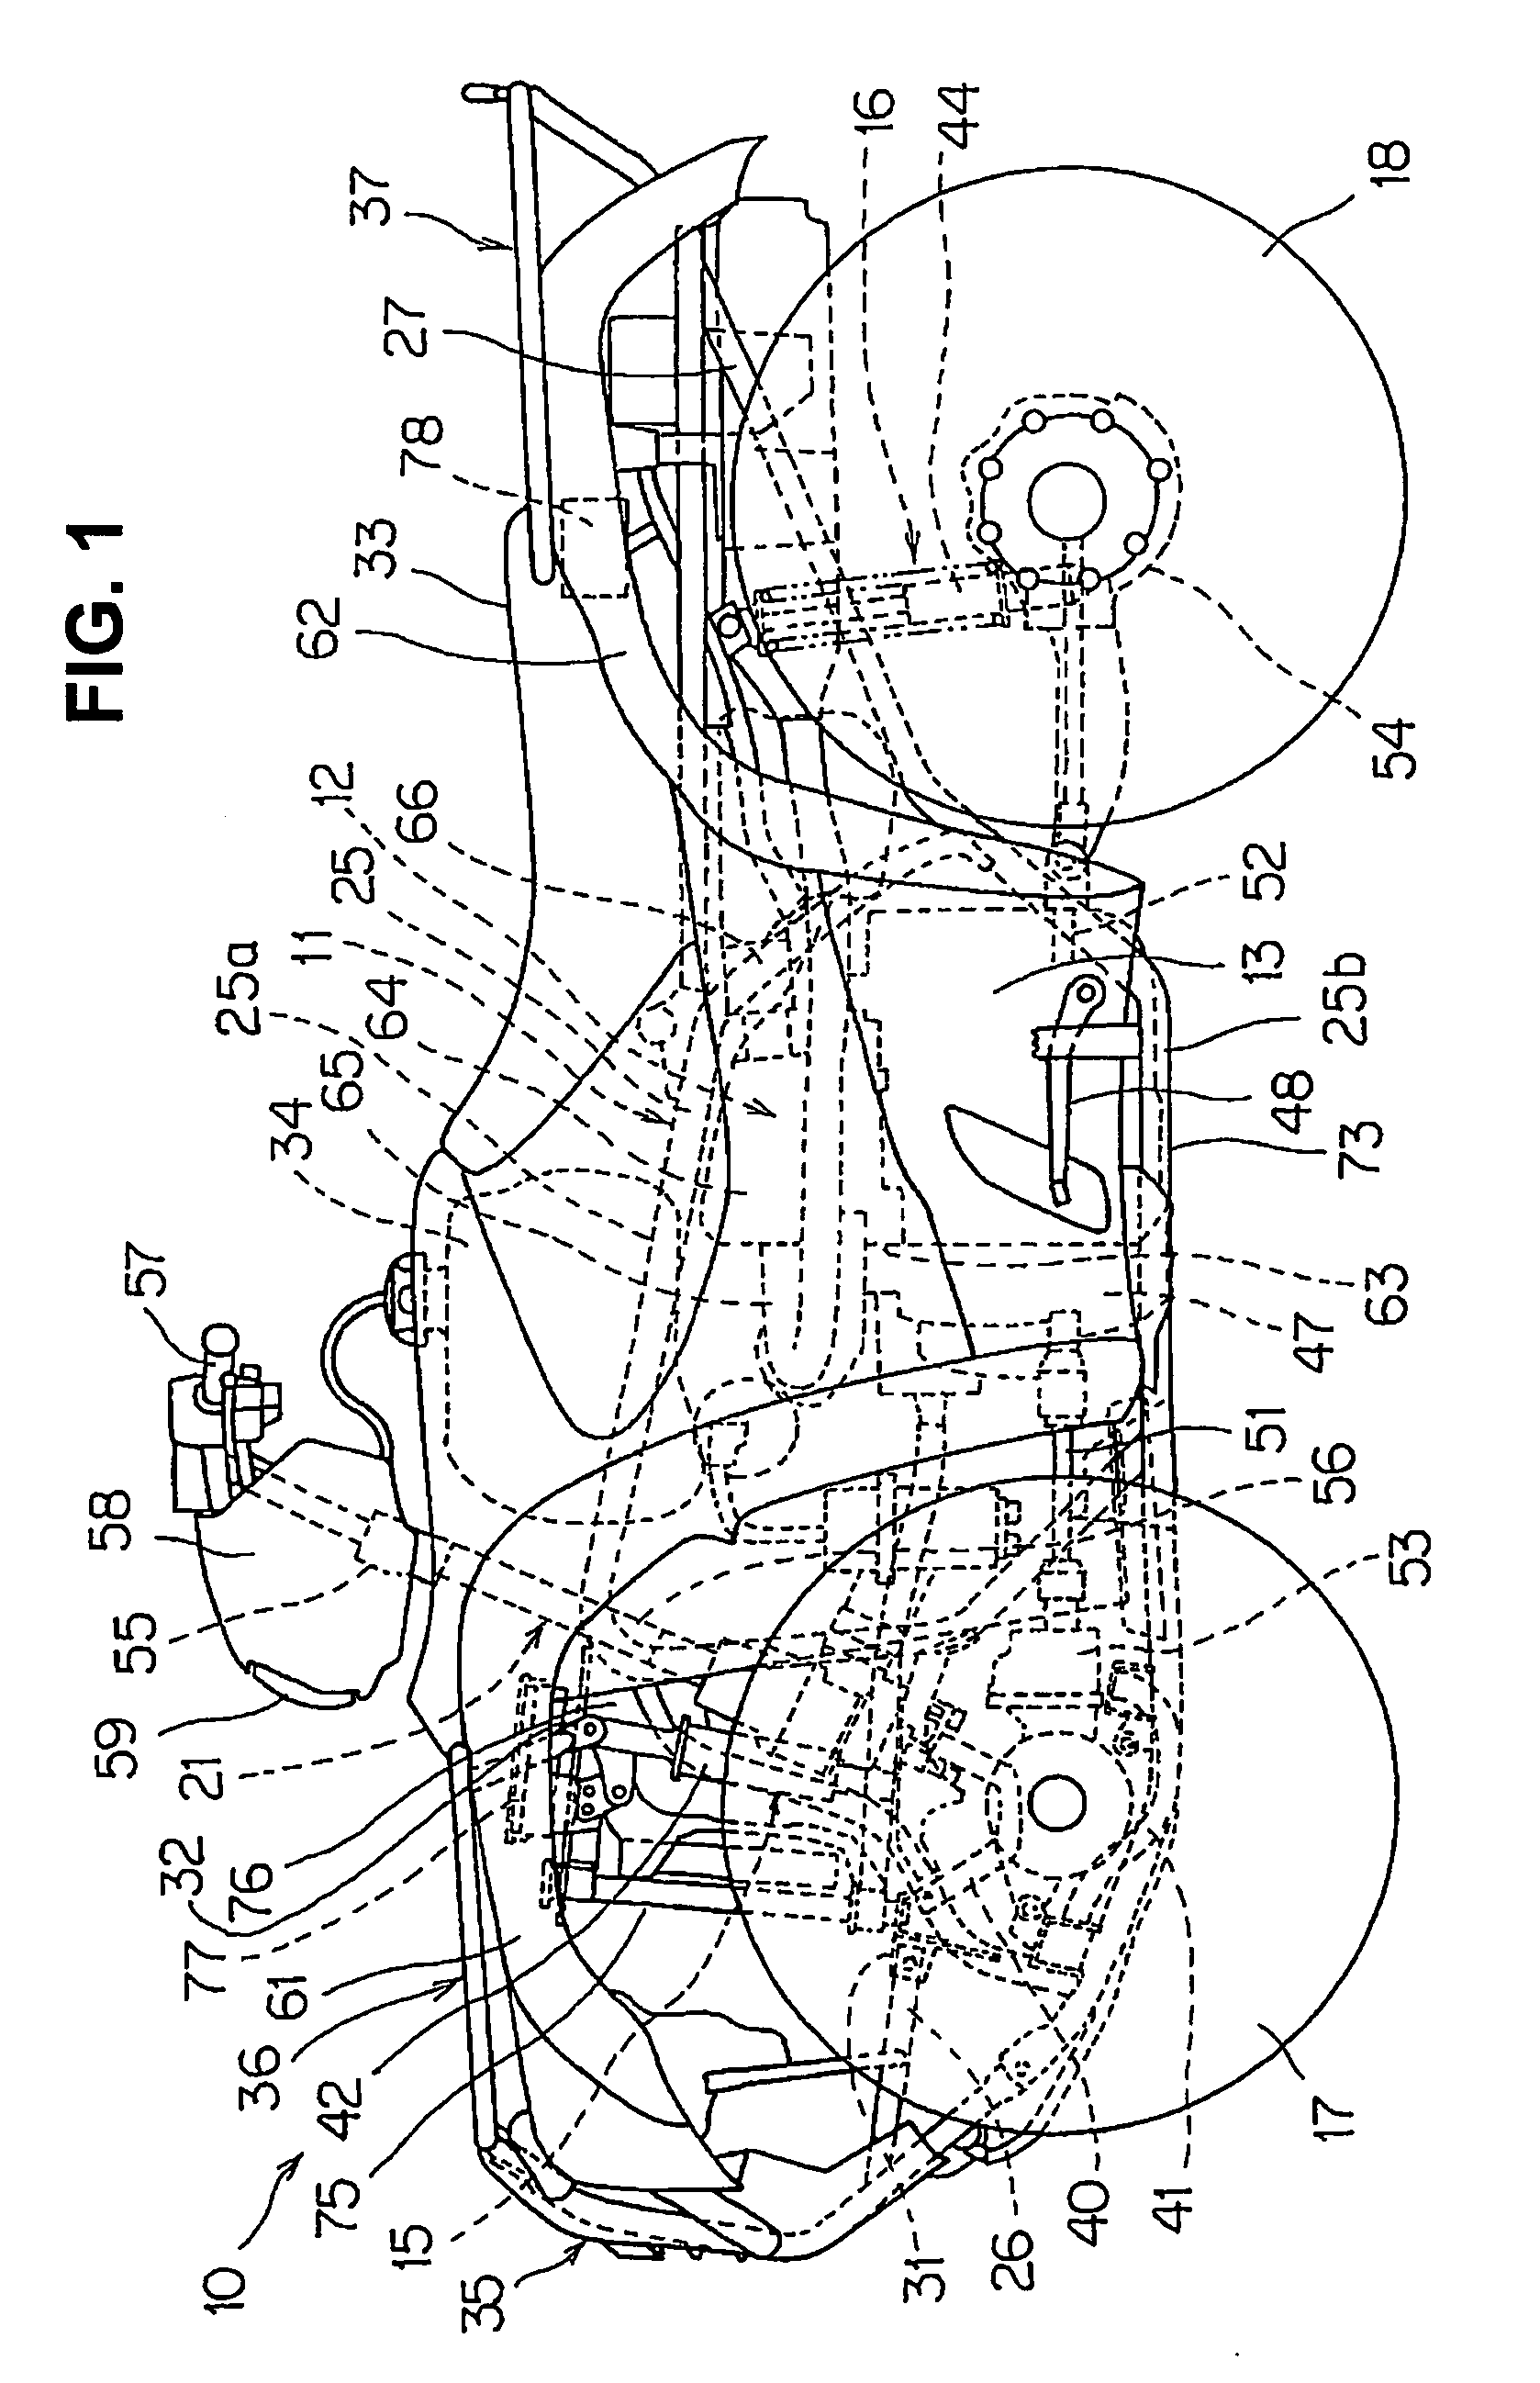 Combined heat shield and wire-holding structure for a saddle-type vehicle